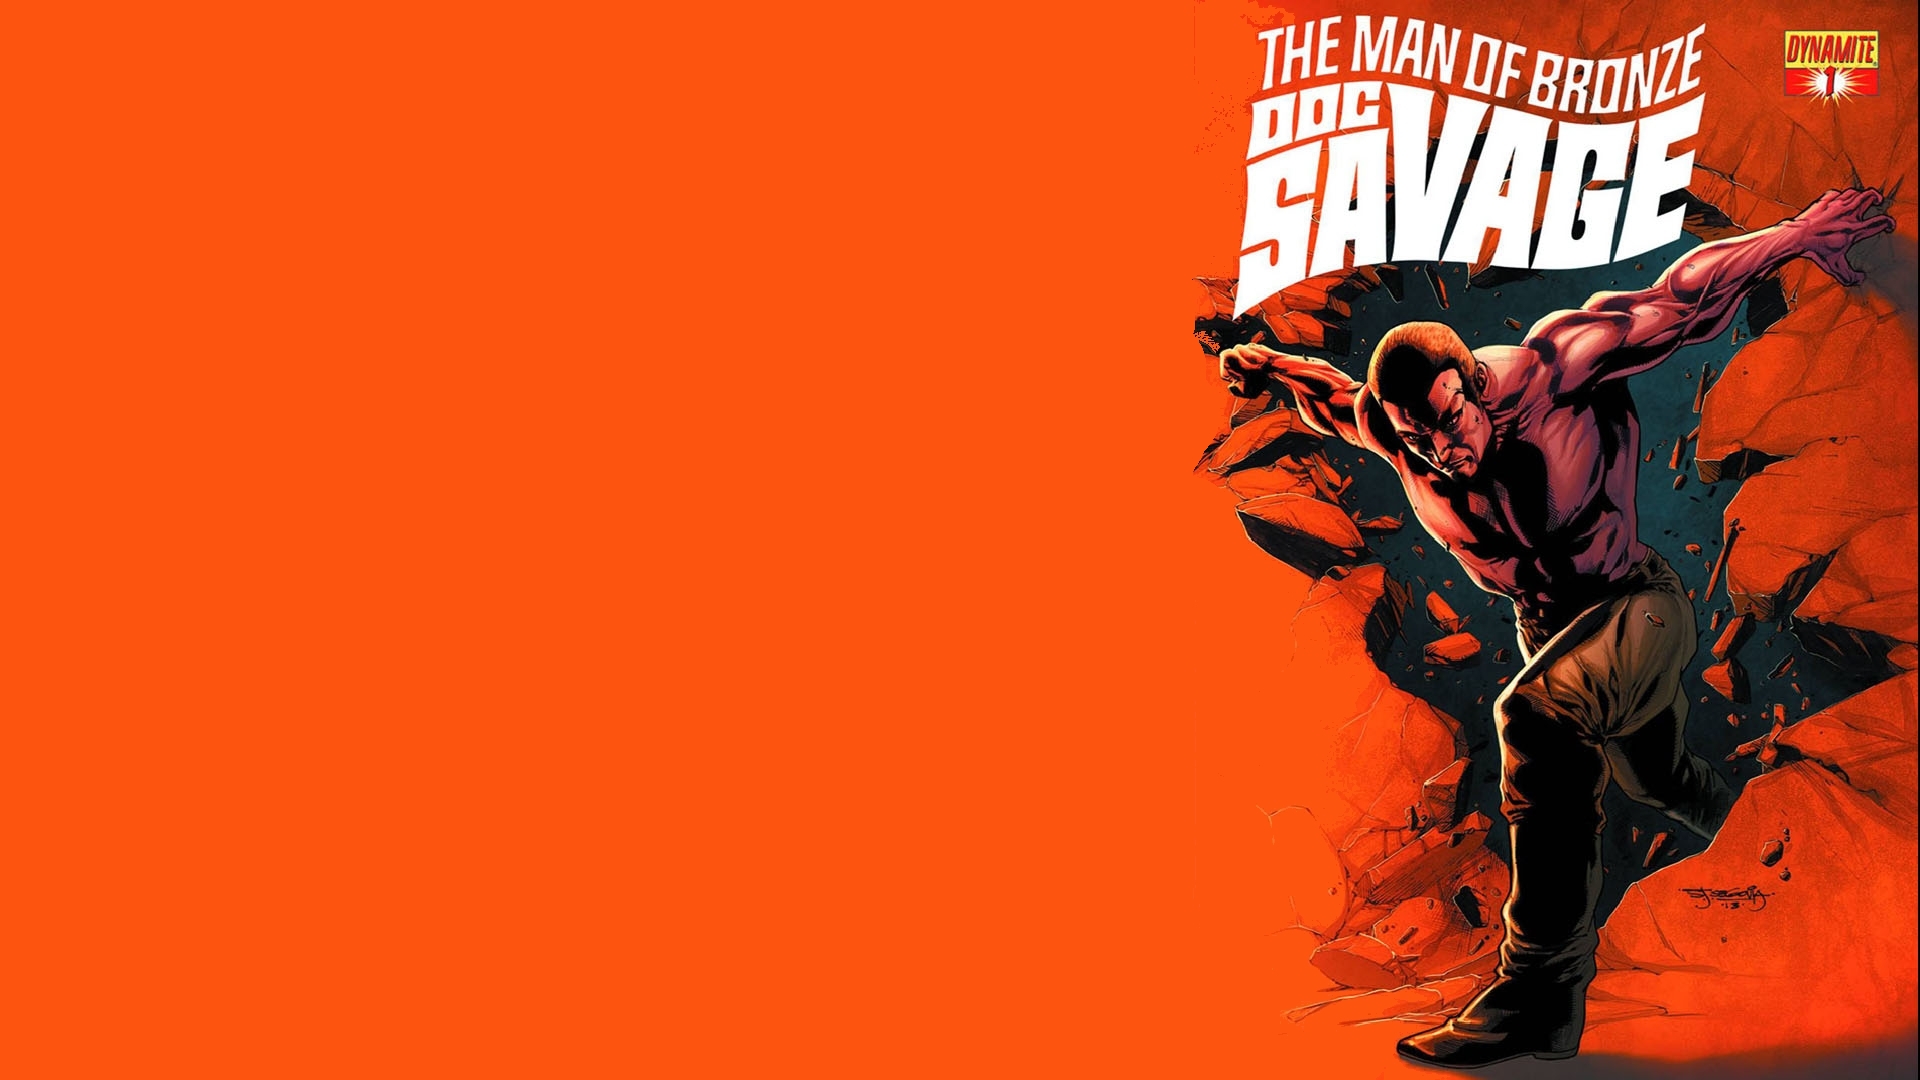 3 Doc Savage Hd Wallpapers Backgrounds Wallpaper Abyss HD Wallpapers Download Free Images Wallpaper [wallpaper981.blogspot.com]